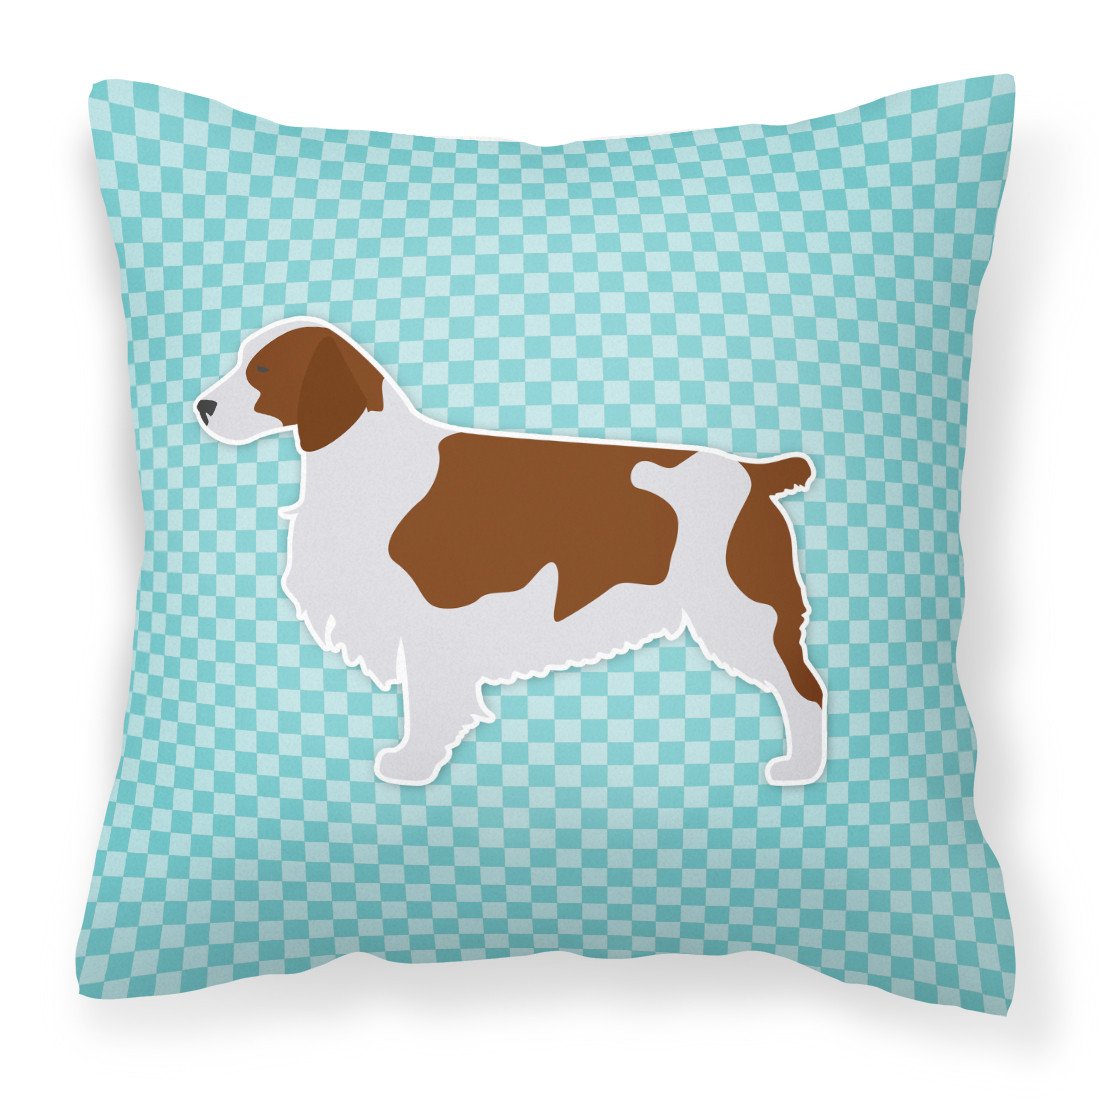 Welsh Springer Spaniel  Checkerboard Blue Fabric Decorative Pillow BB3700PW1818 by Caroline's Treasures